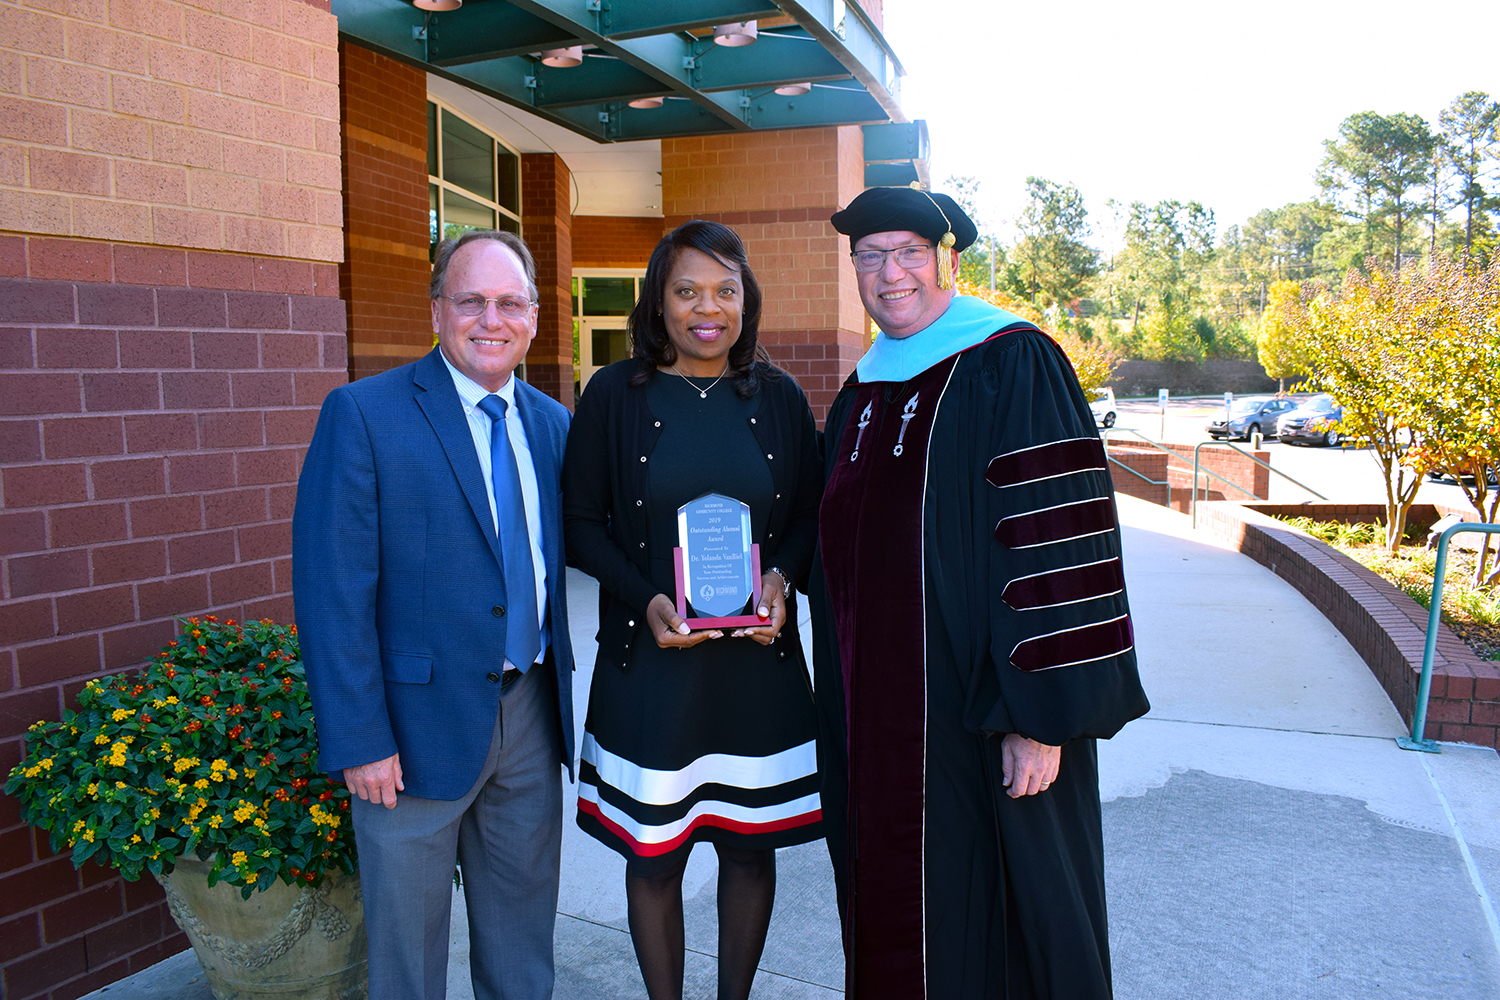 College leaders stand with Dr. VanRiel, who holds her Outstanding Alumni Award